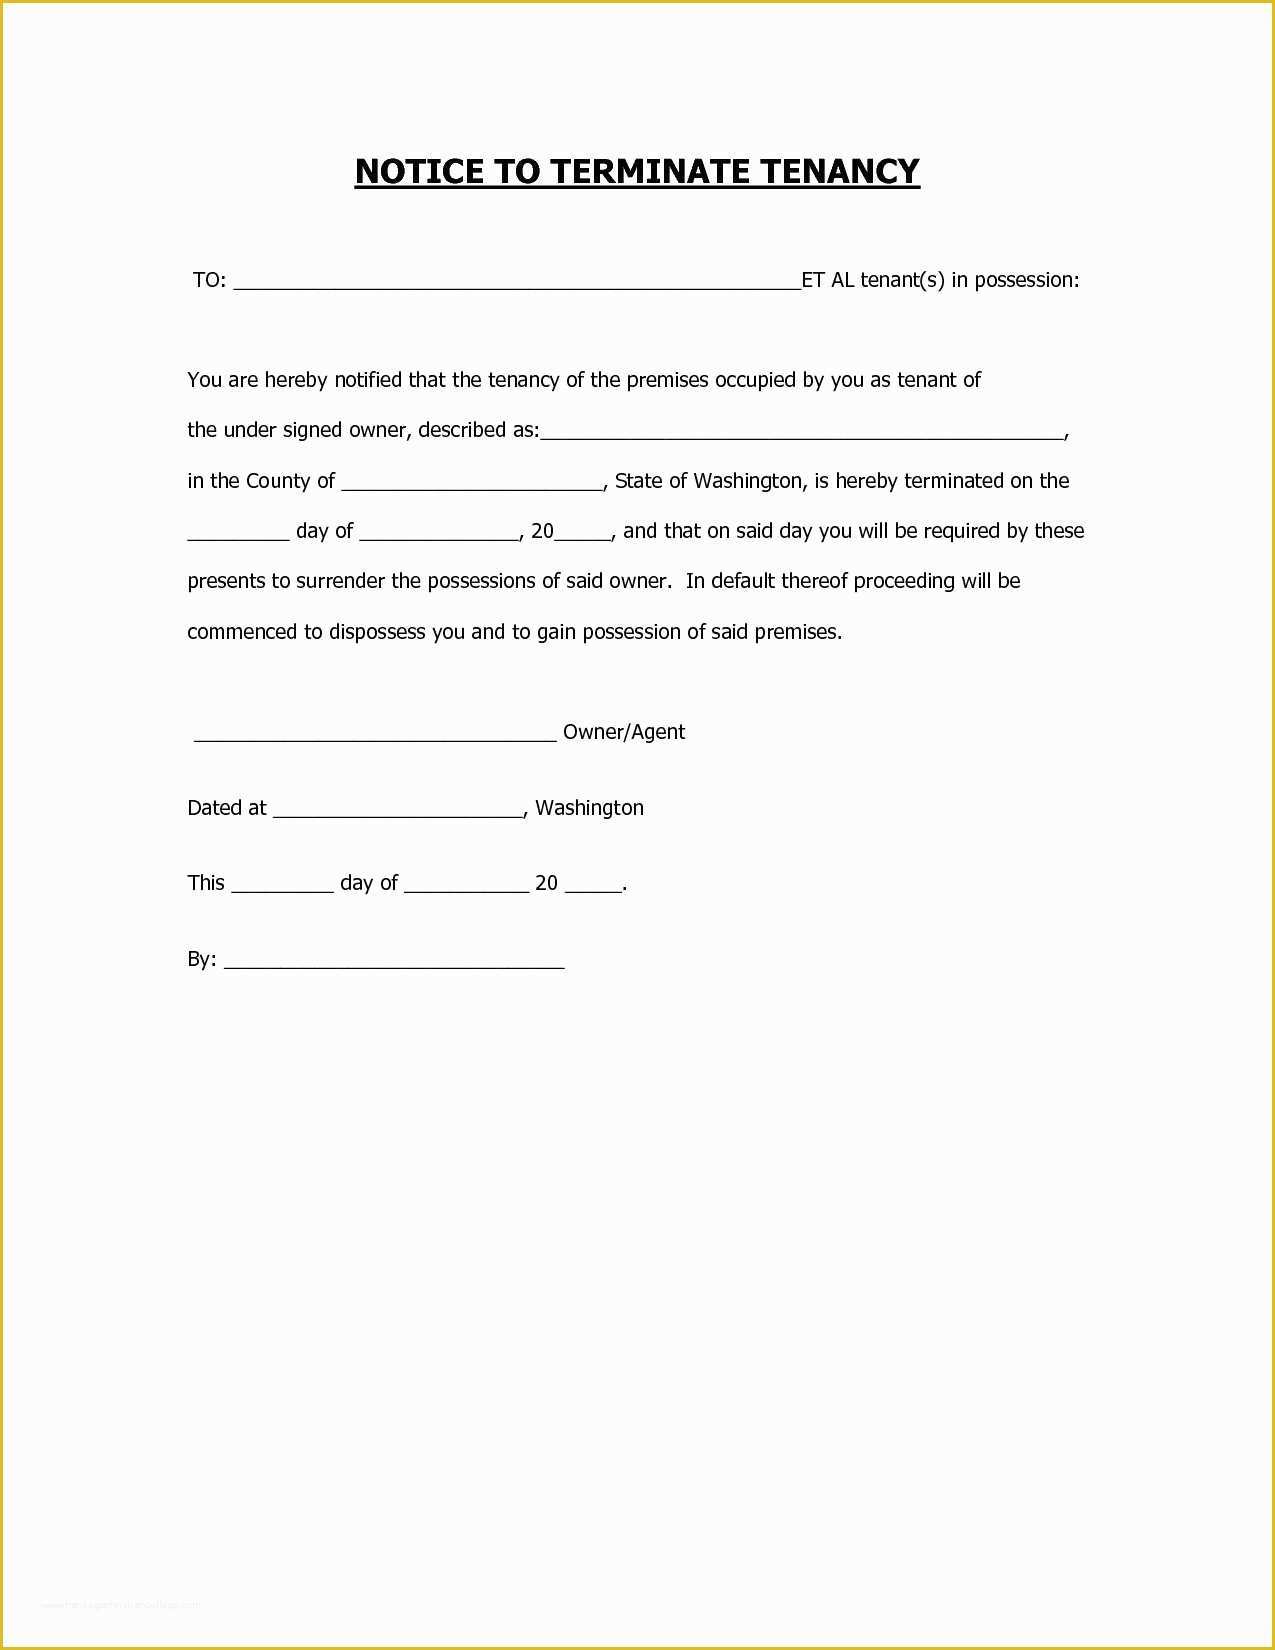 Free Landlord Templates Of Landlord Notice Letter to Tenant Template Examples